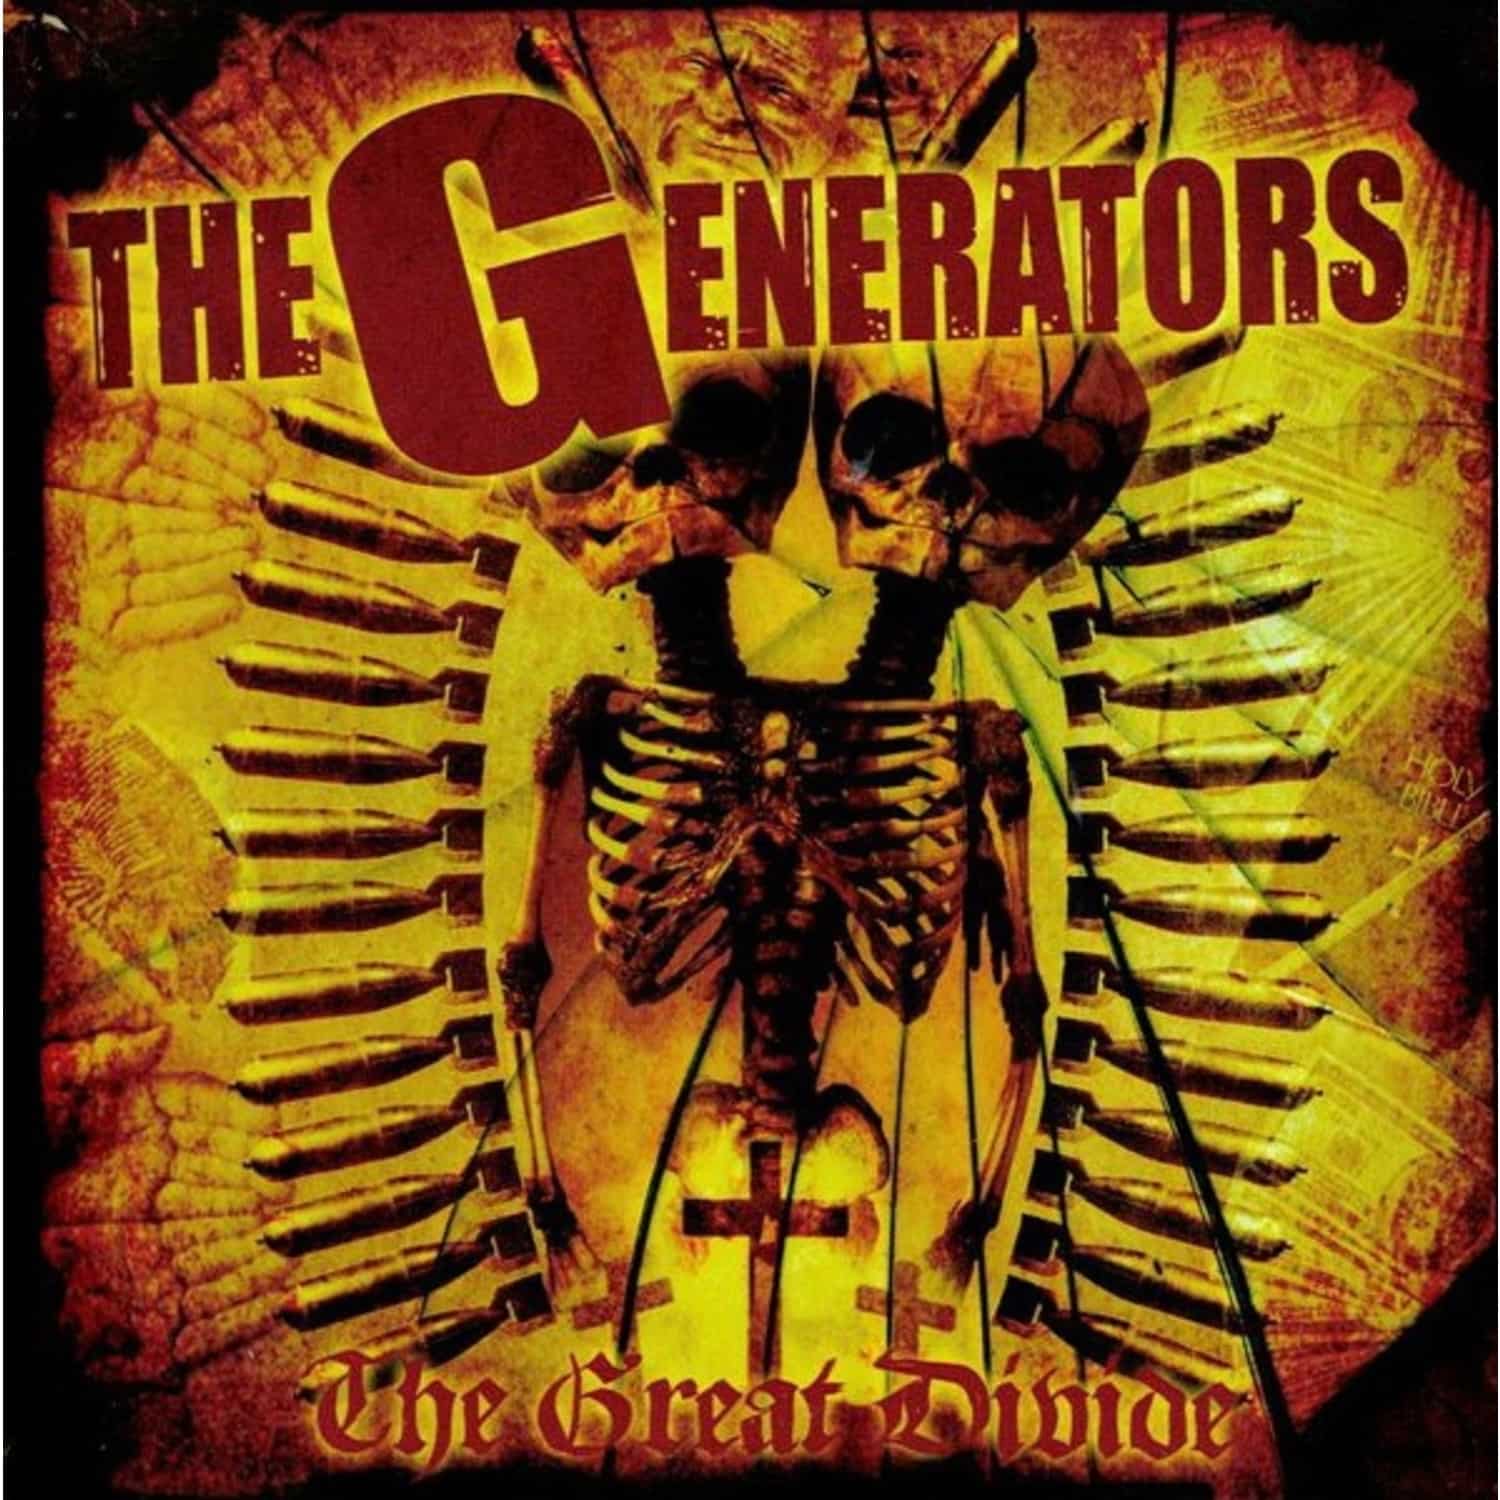  The Generators - THE GREAT DIVIDE 